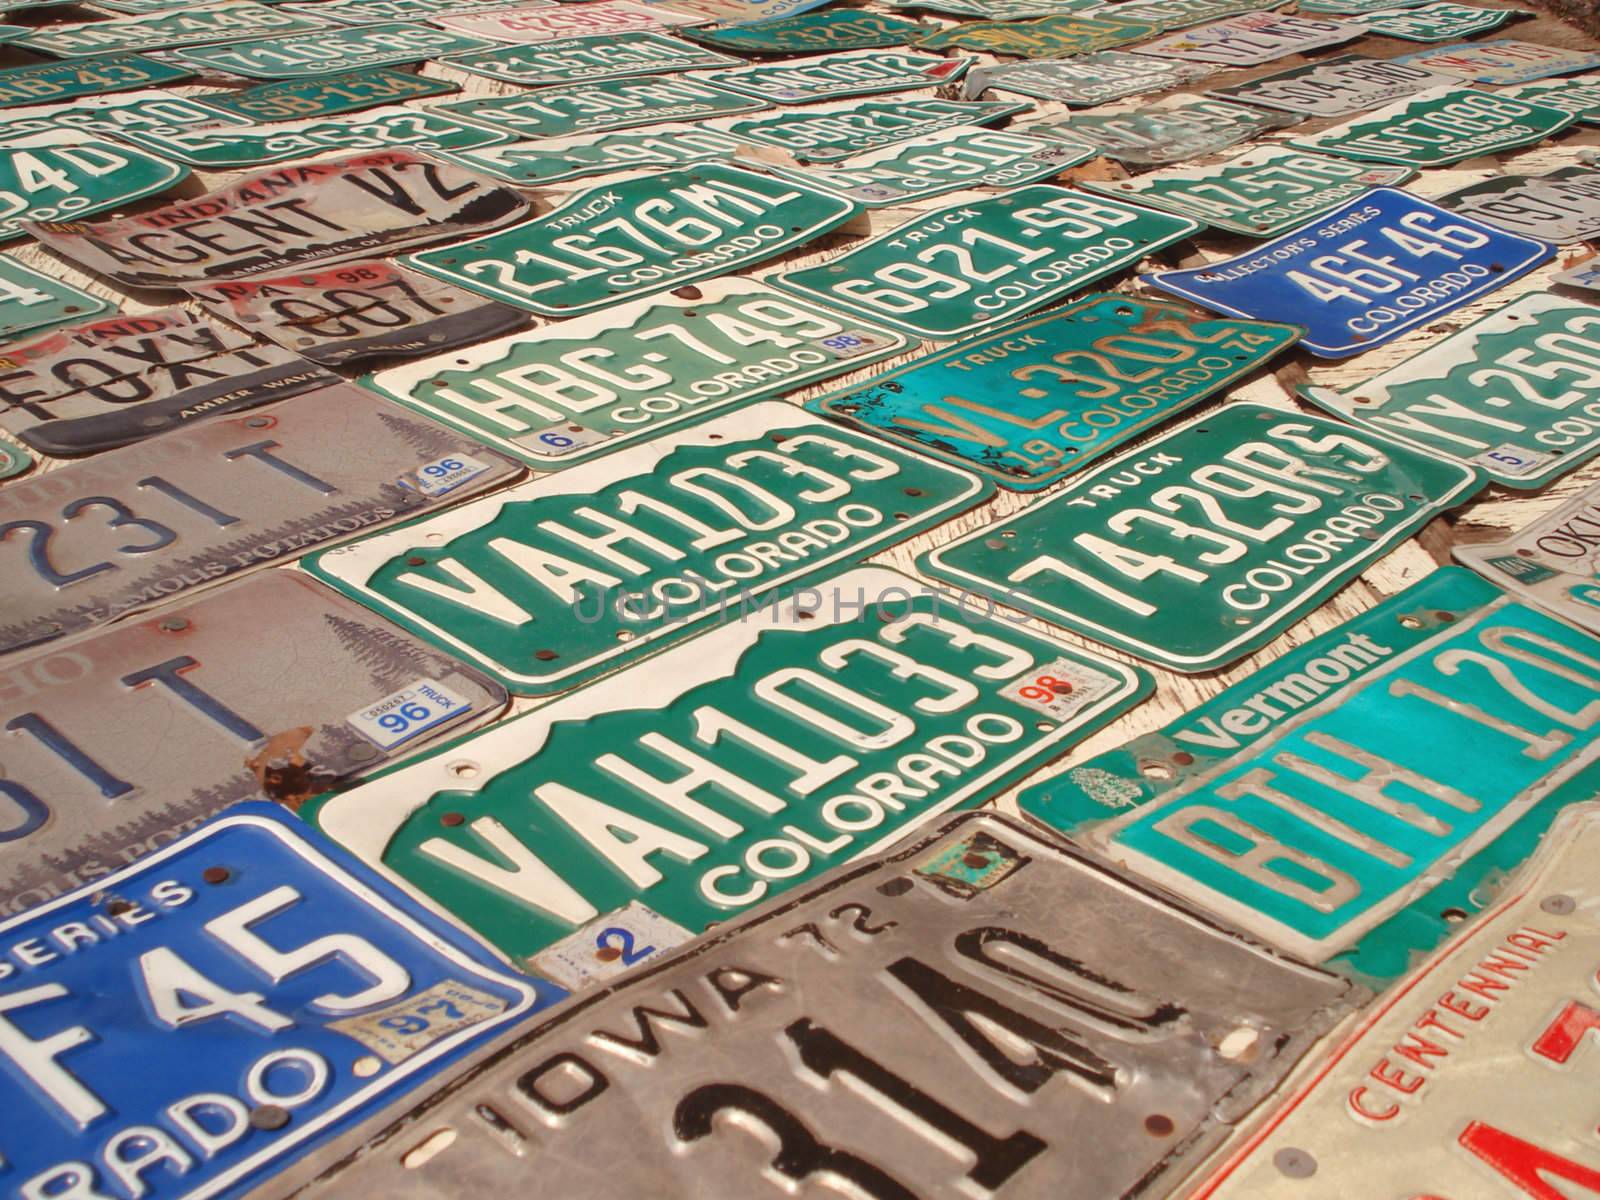 A wall has many different styles of license plates nailed to it.